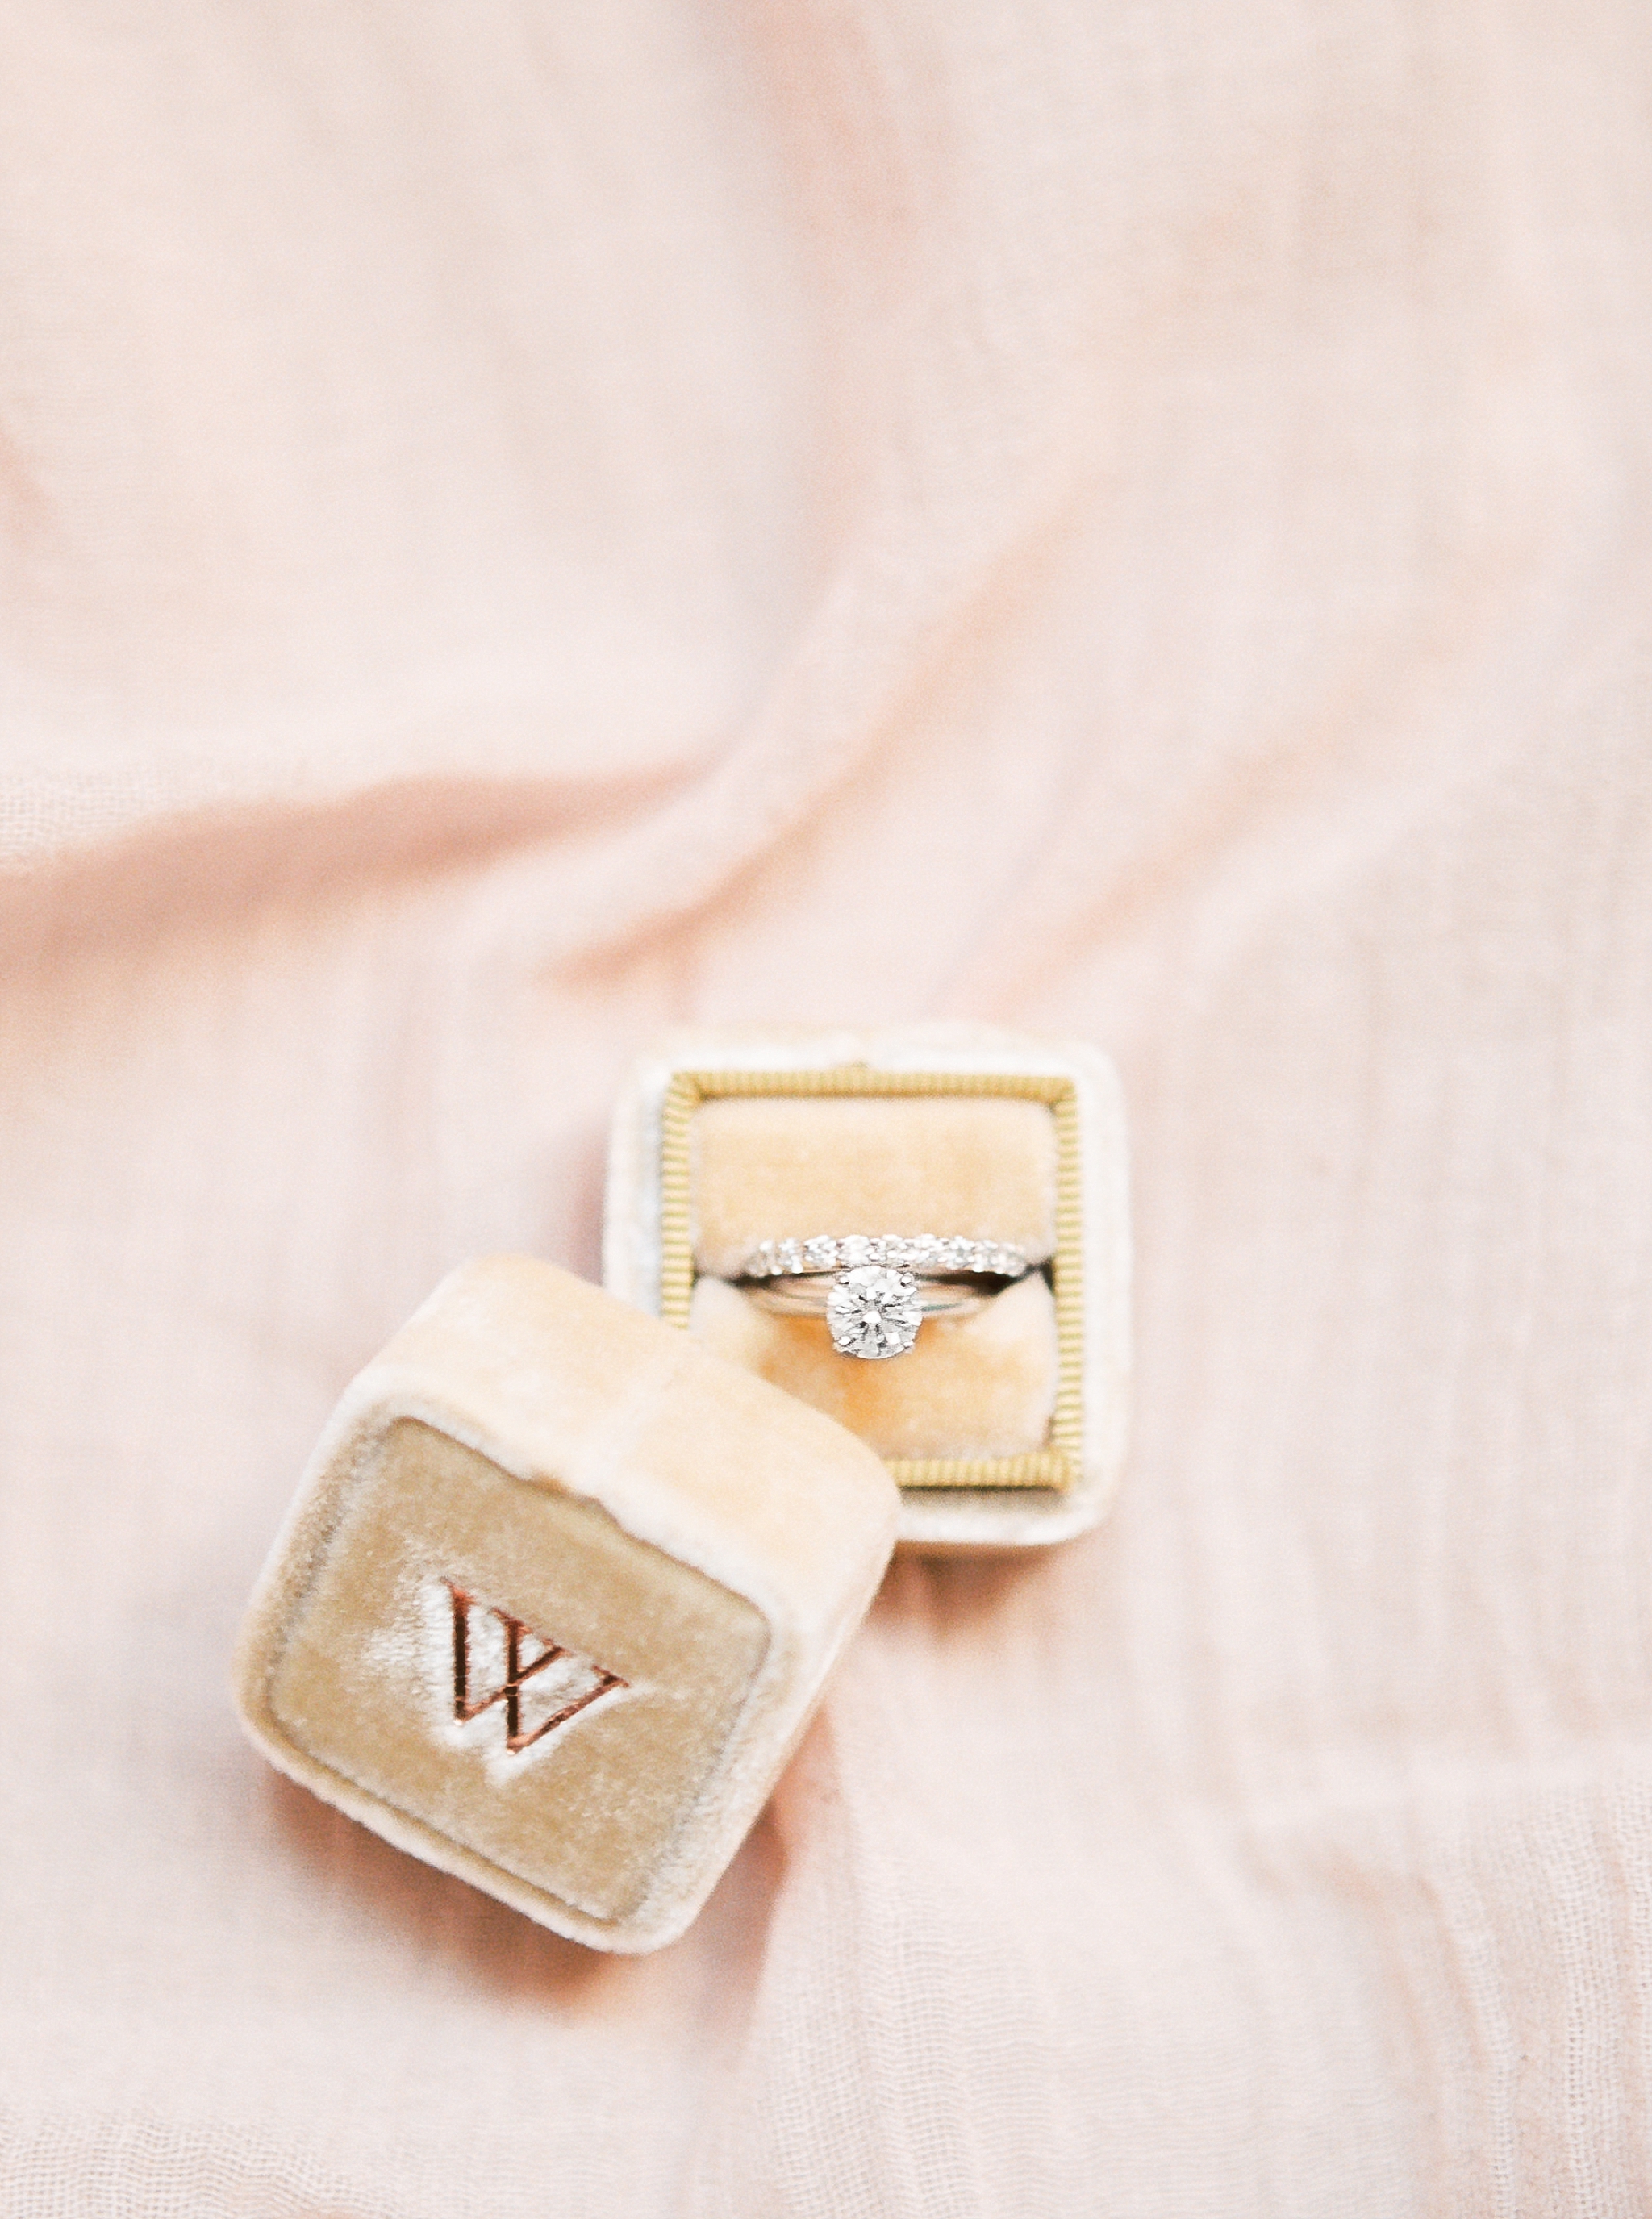 This DC wedding photographer shares various methods on how to clean your engagement ring for the most bling! 